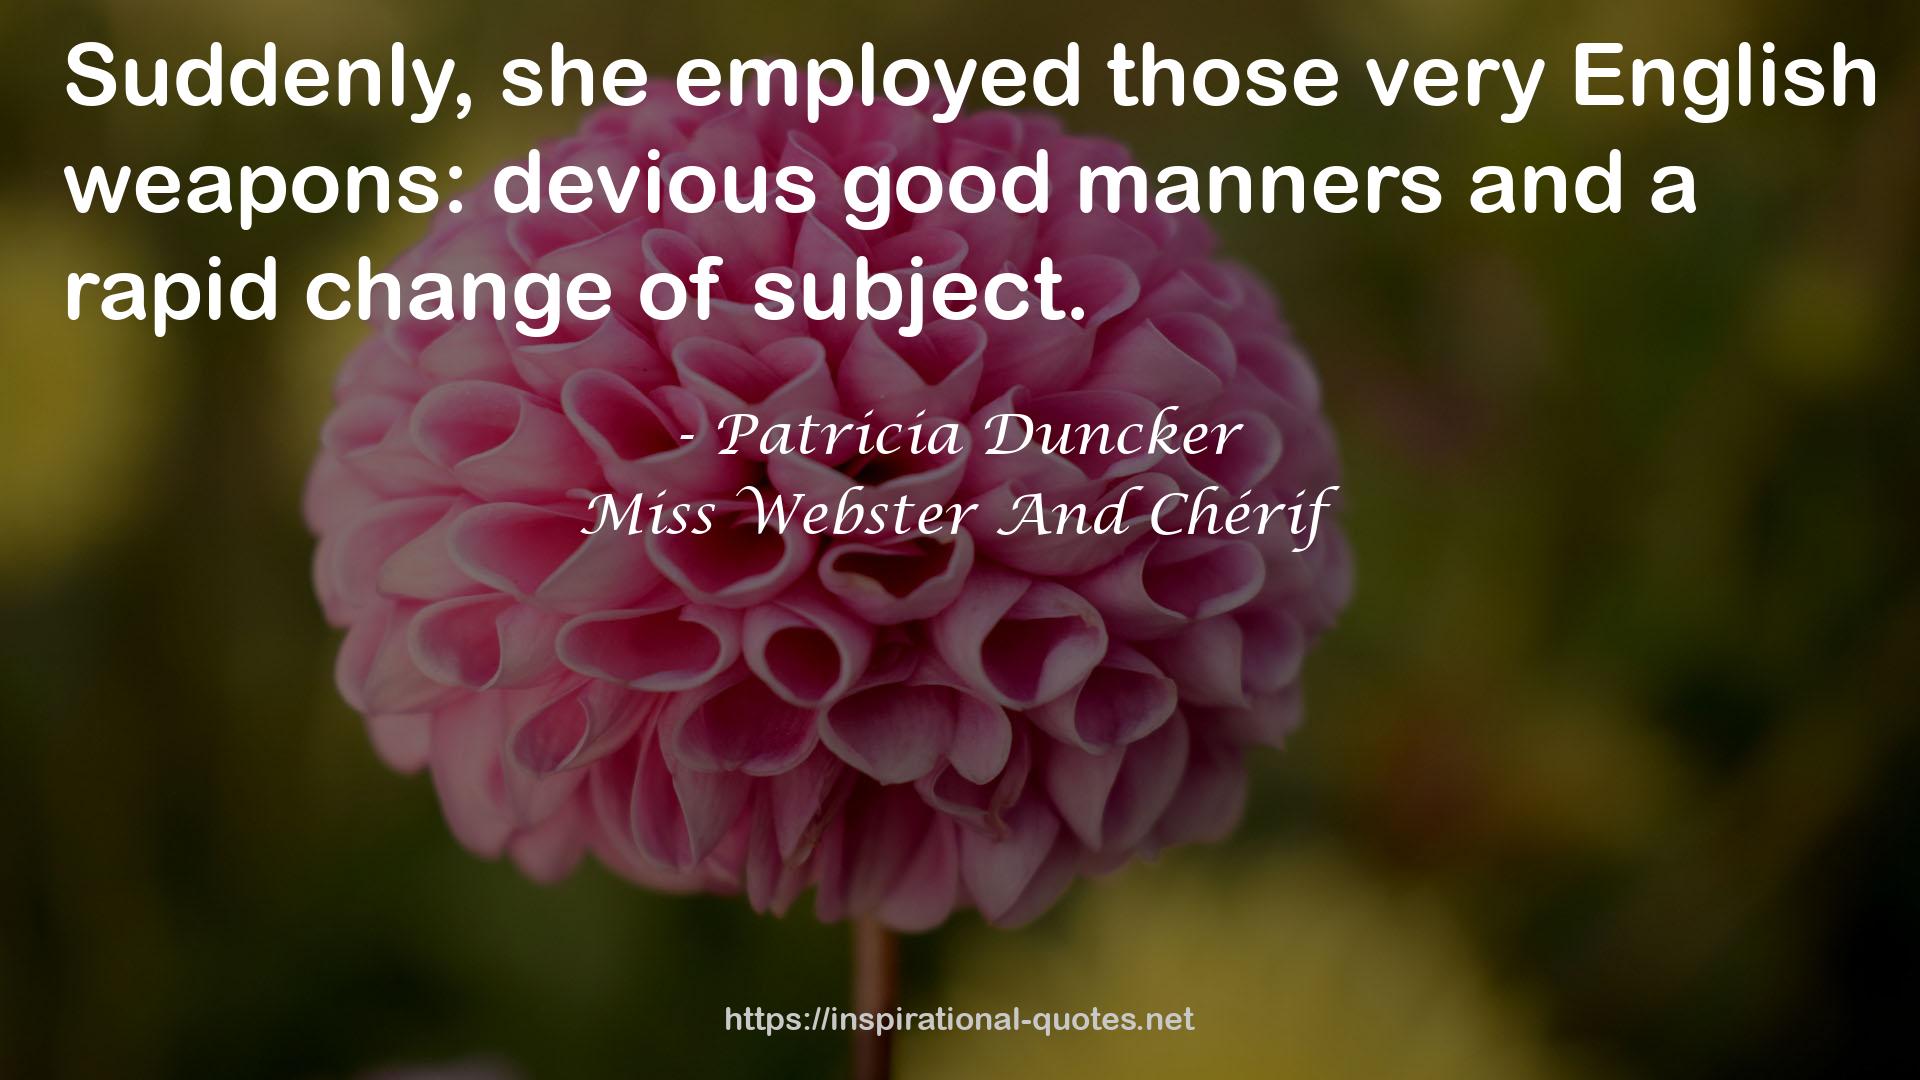 Miss Webster And Chérif QUOTES